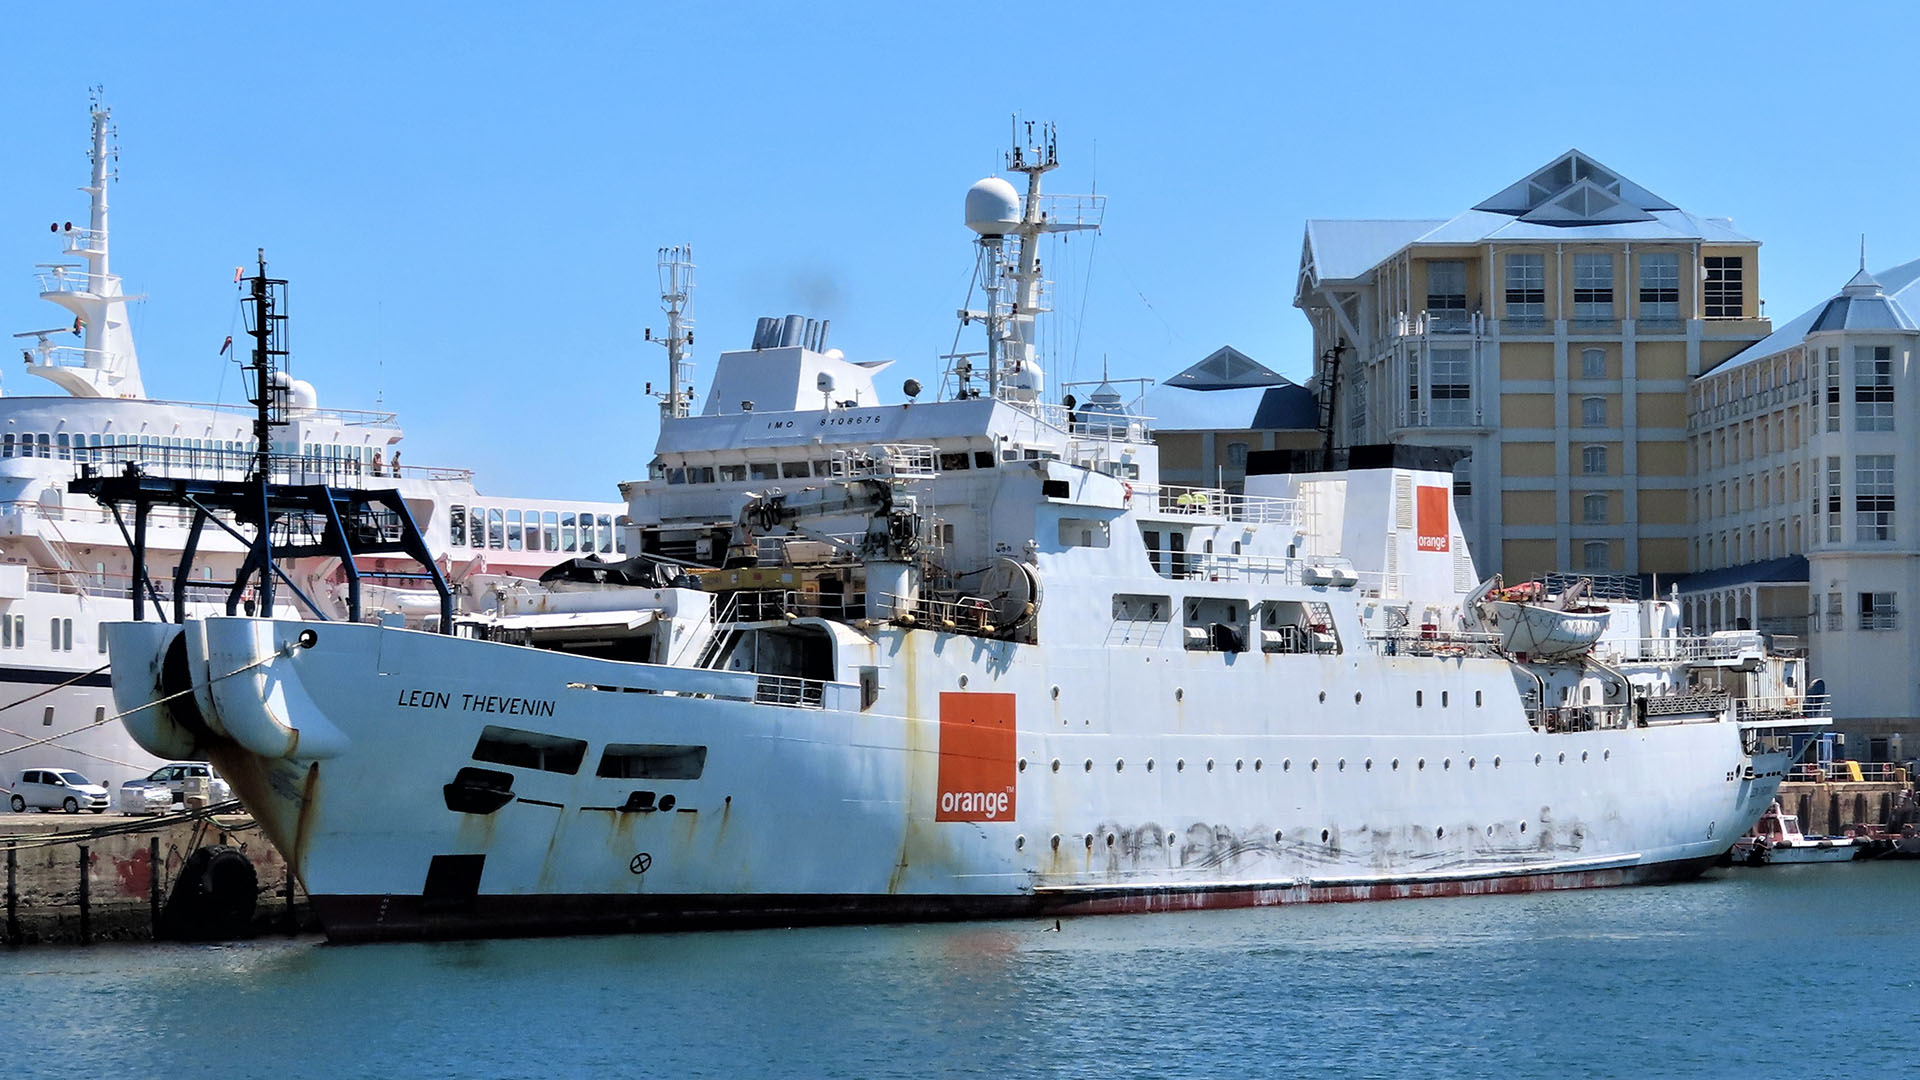 Photo of the Leon Thevenin in Cape Town harbour in March 2019